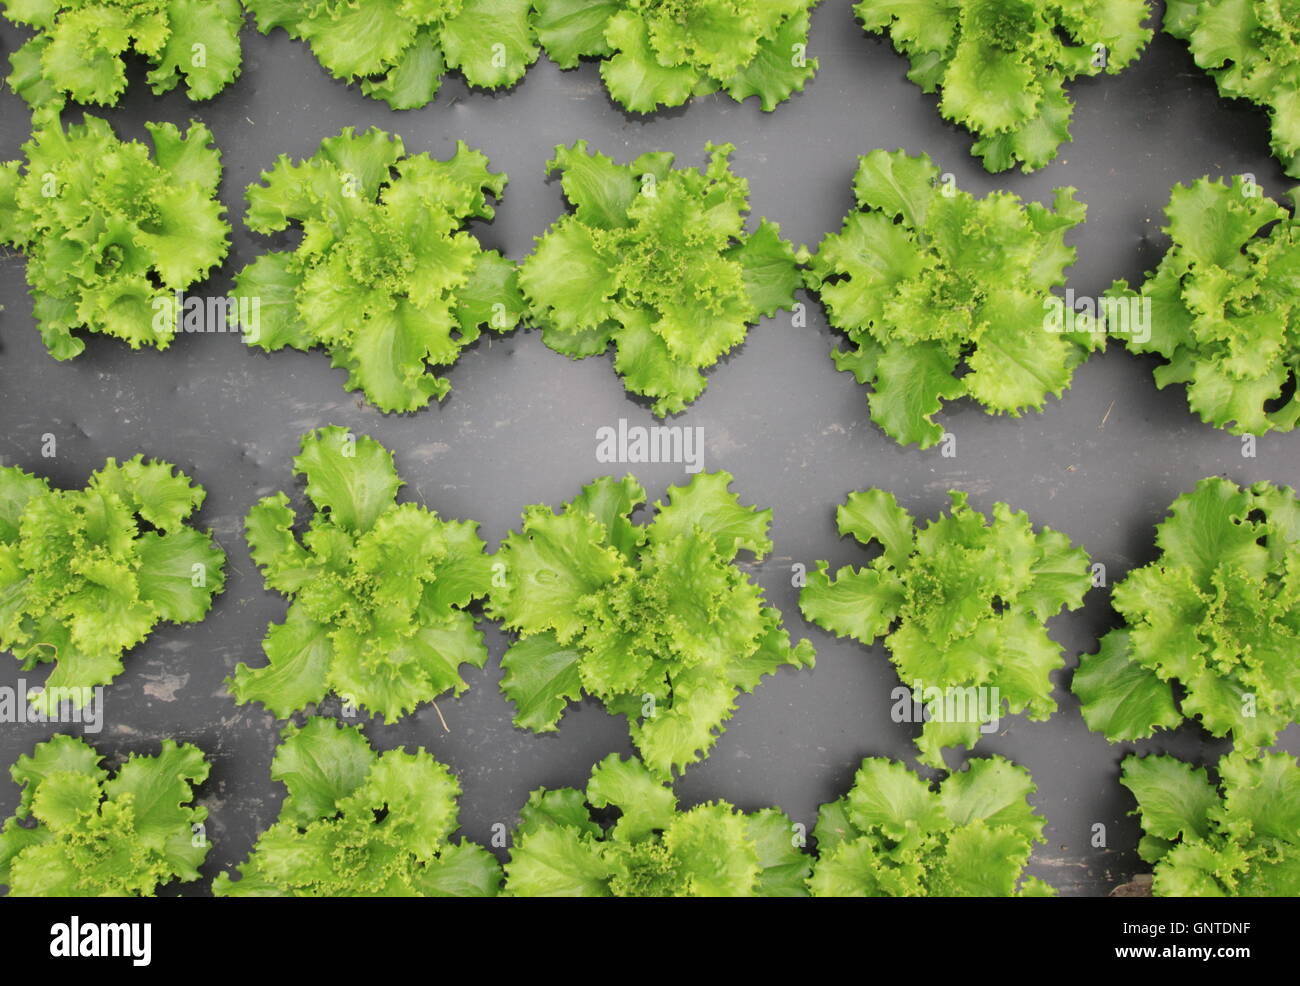 Overhead view of organic loose leaf lettuce grown using black sheeting to suppress weeds in English kitchen garden setting, UK Stock Photo